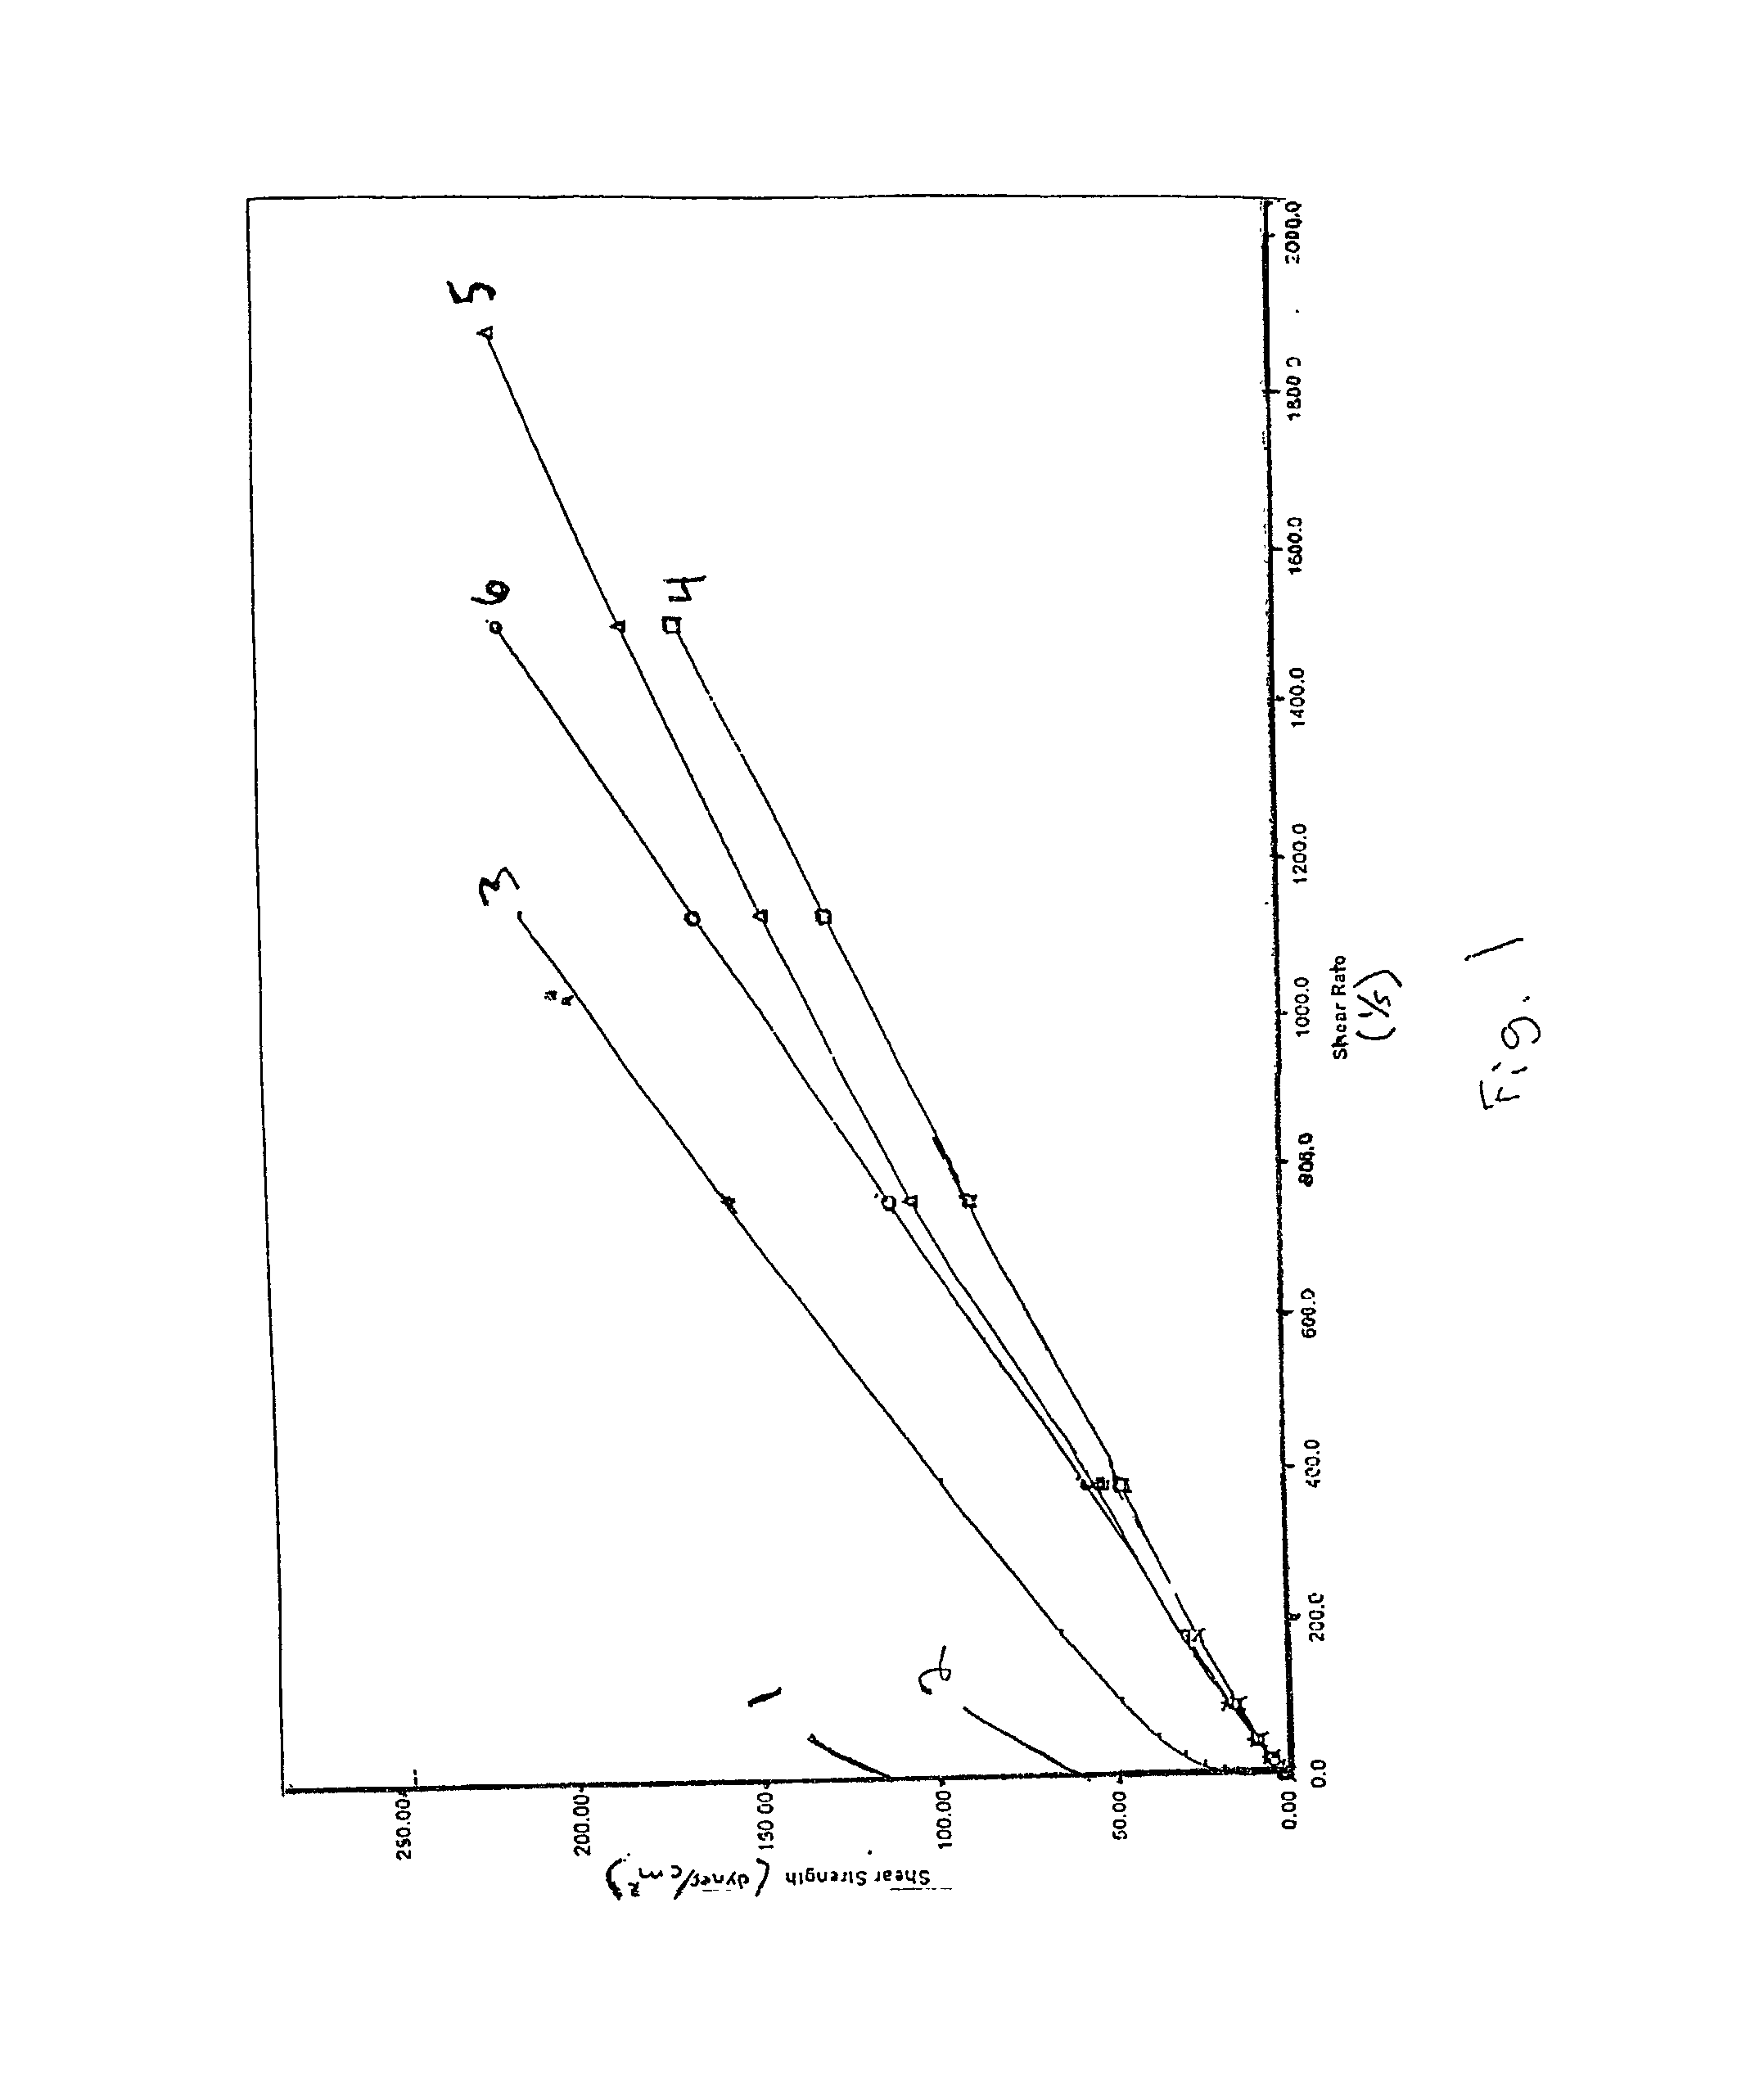 Dispersible barium titanate-based particles and methods of forming the same